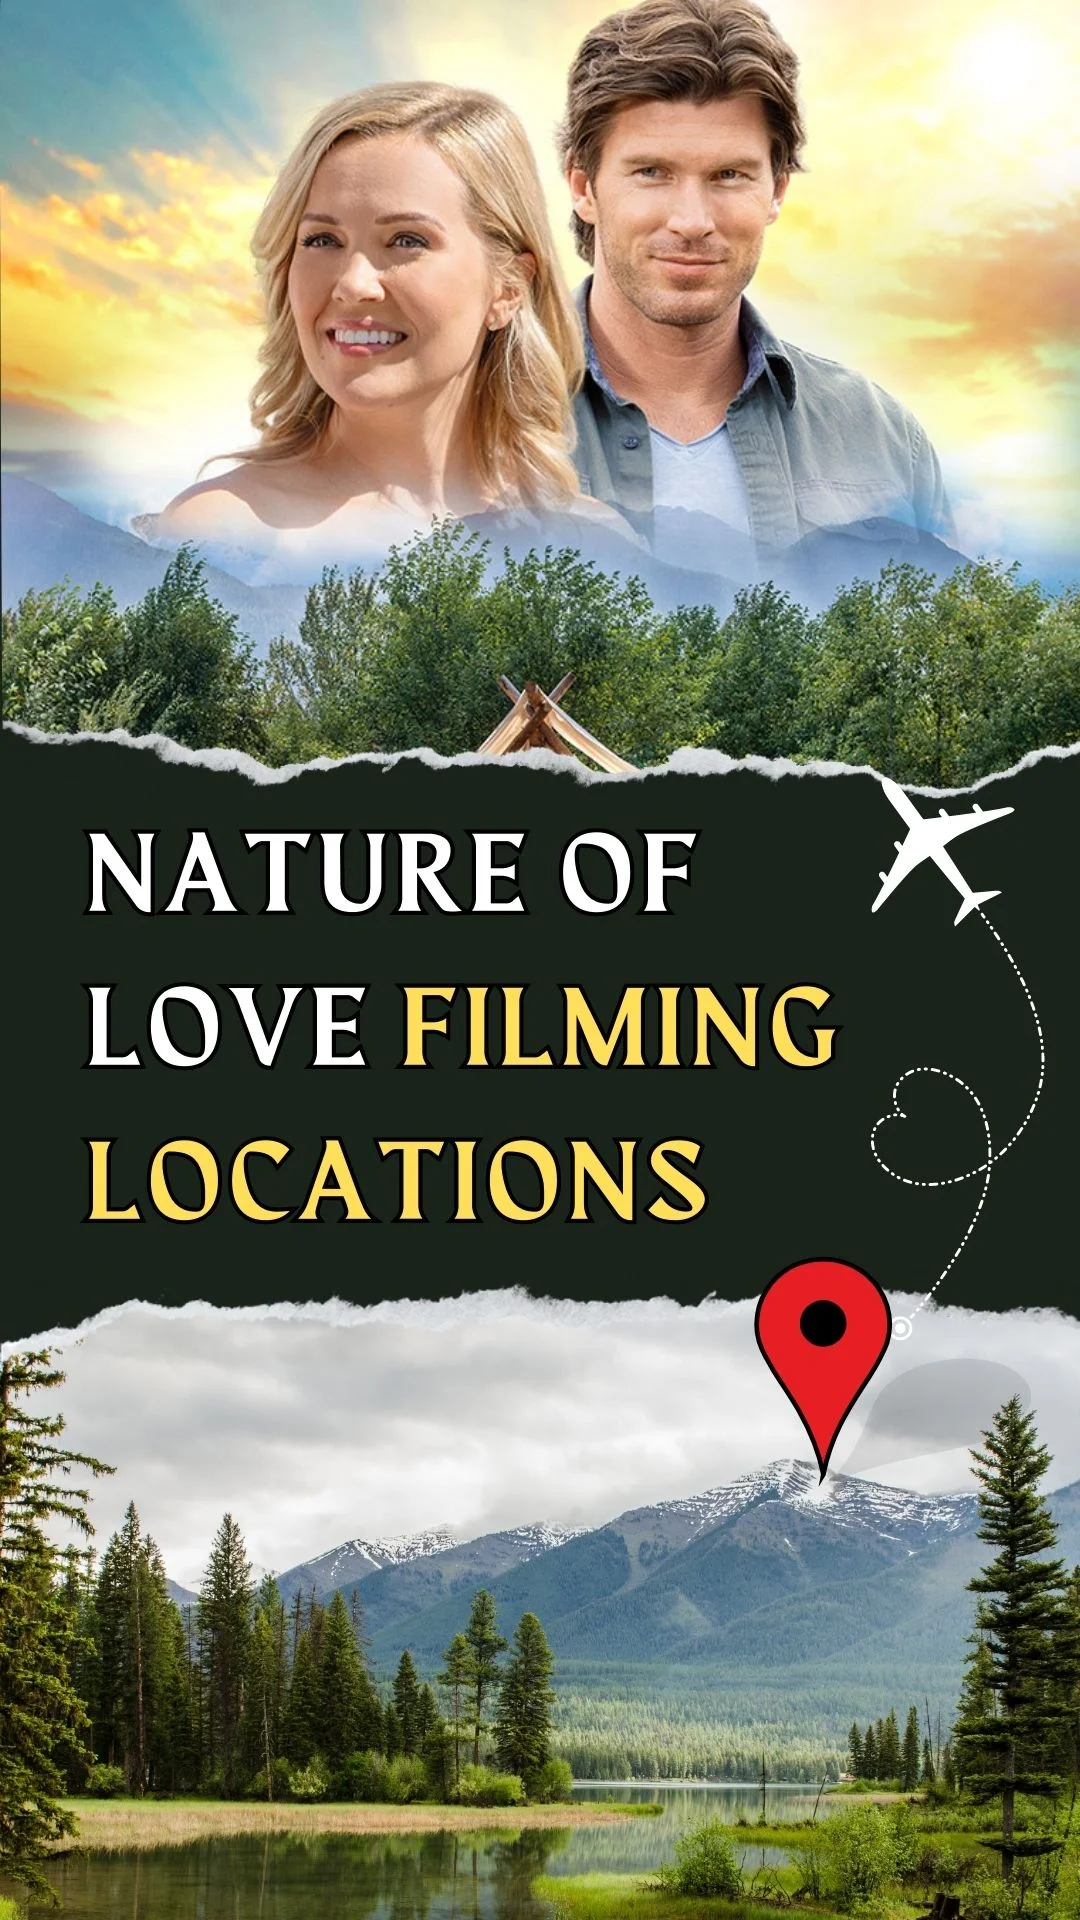 Nature of Love Filming Locations